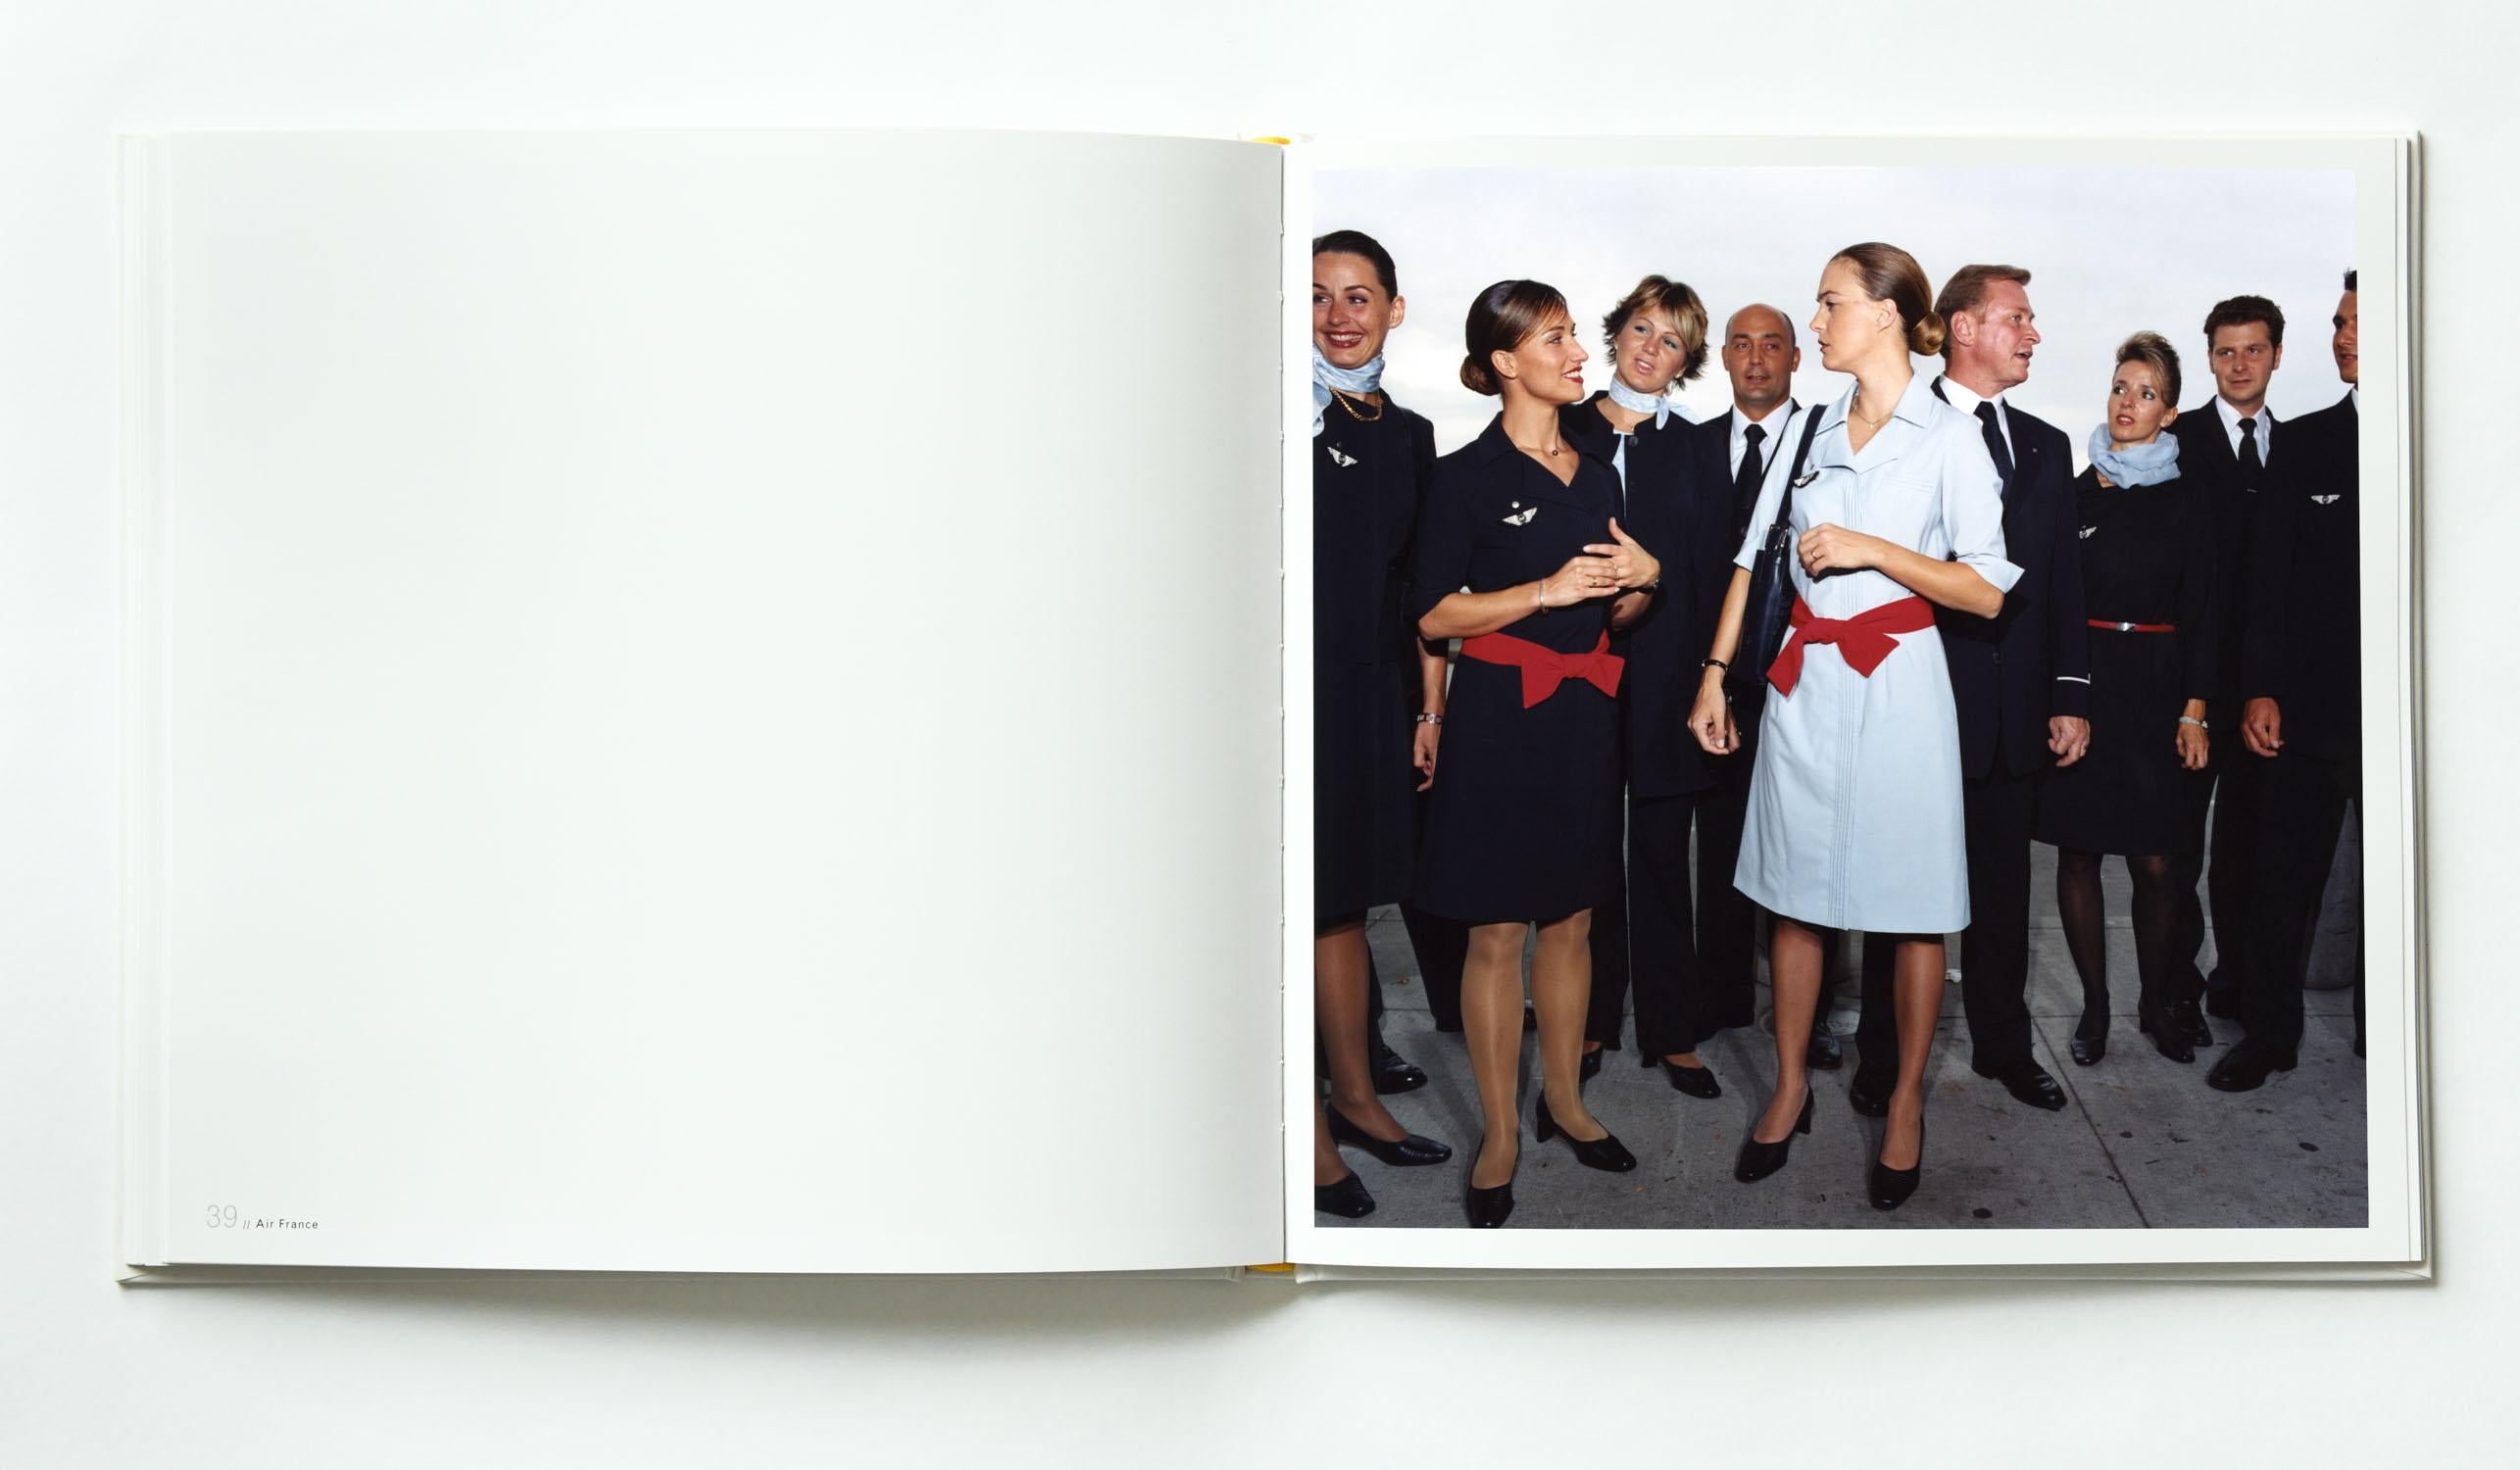 Flight Attendants
powerHouse Books, 2008
112 pages, 10.25 x 10.25 in
51 color photographs
Signed, $125

Flying the friendly skies, Brian Finke began photographing flight attendants as he crisscrossed the country on Delta, JetBlue, Hawaiian, Hooters